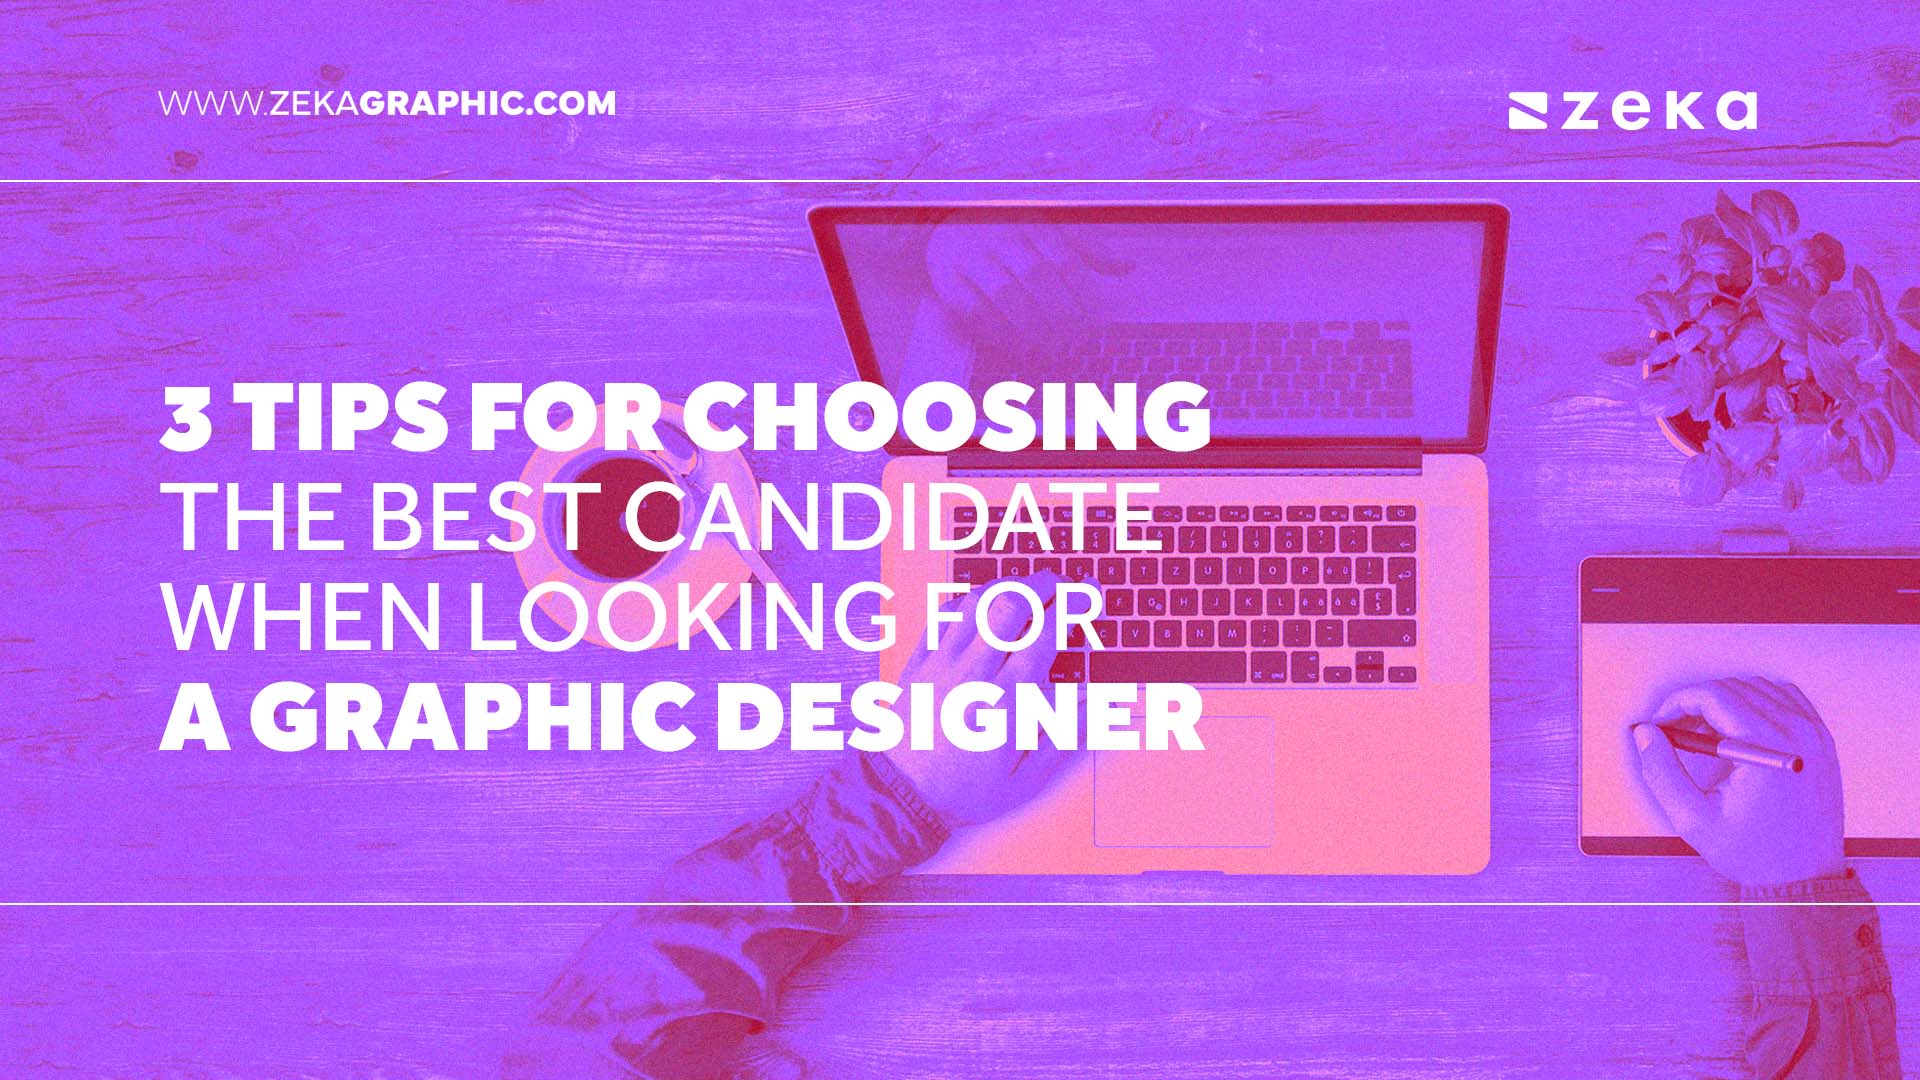 3 Tips for Choosing The Best Candidate When Looking for a Graphic Designer  - Zeka Design